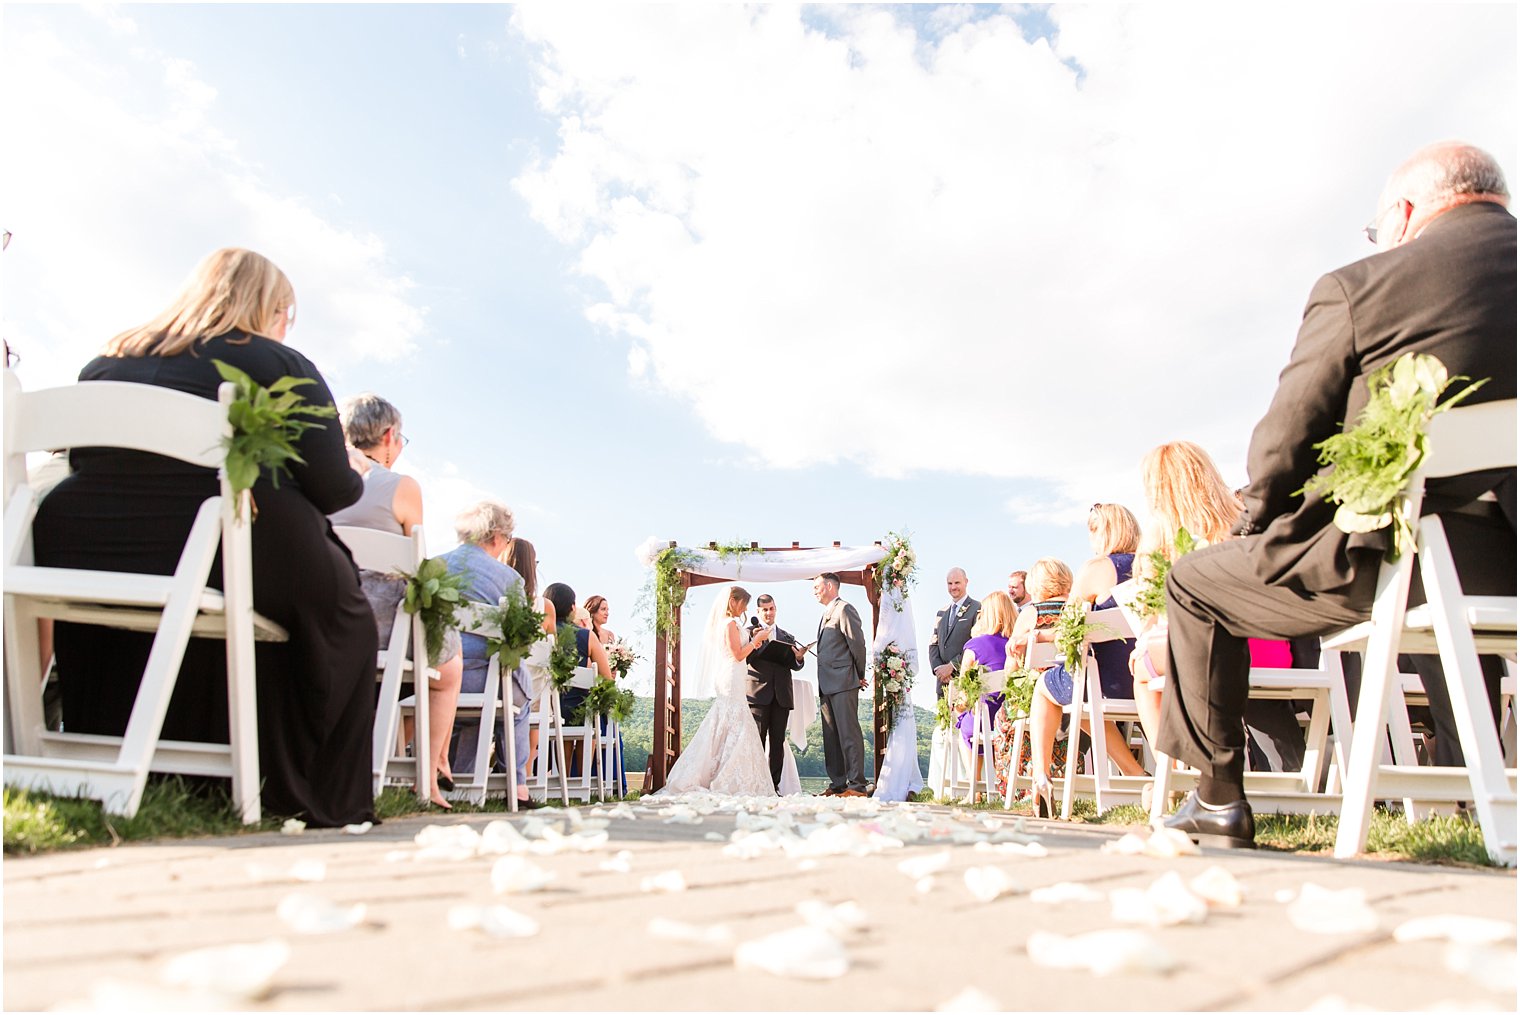 Outdoor ceremony at Lake Valhalla